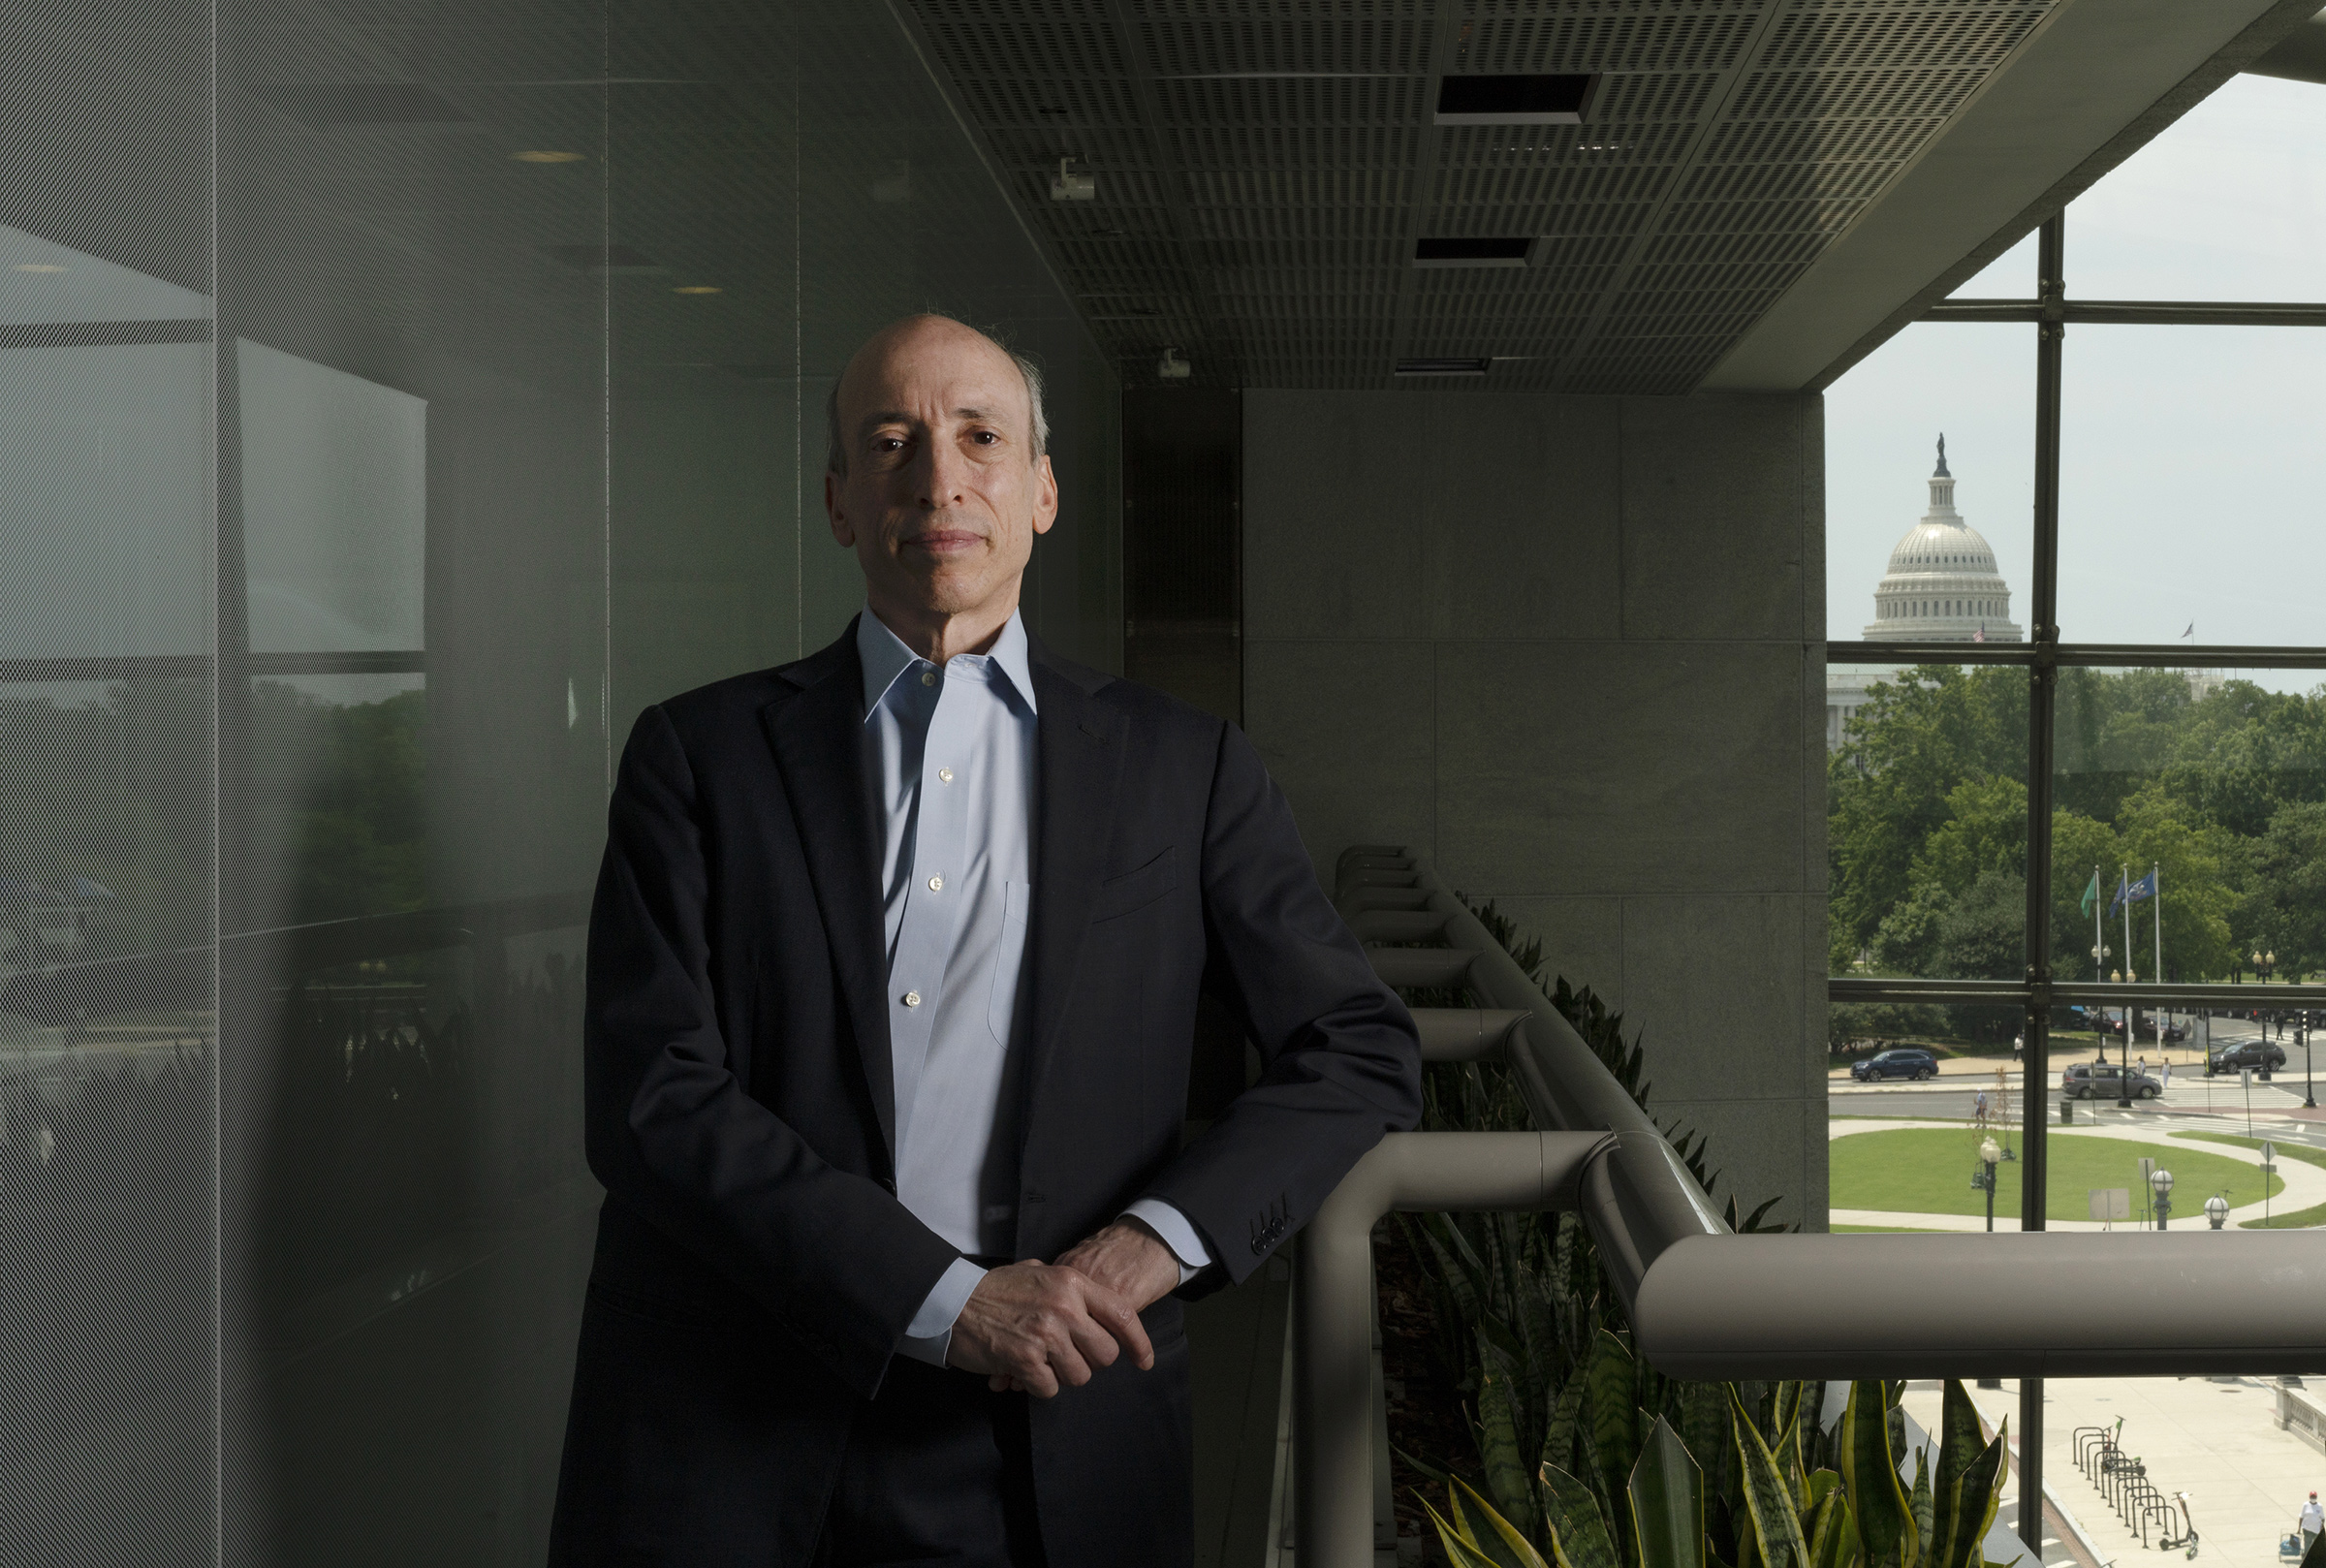 Gary Gensler, chairman of the Securities and Exchange Commission, has drawn the ire of the cryptocurrency industry for his tough stance (Melissa Lyttle—Bloomberg/Getty Images)